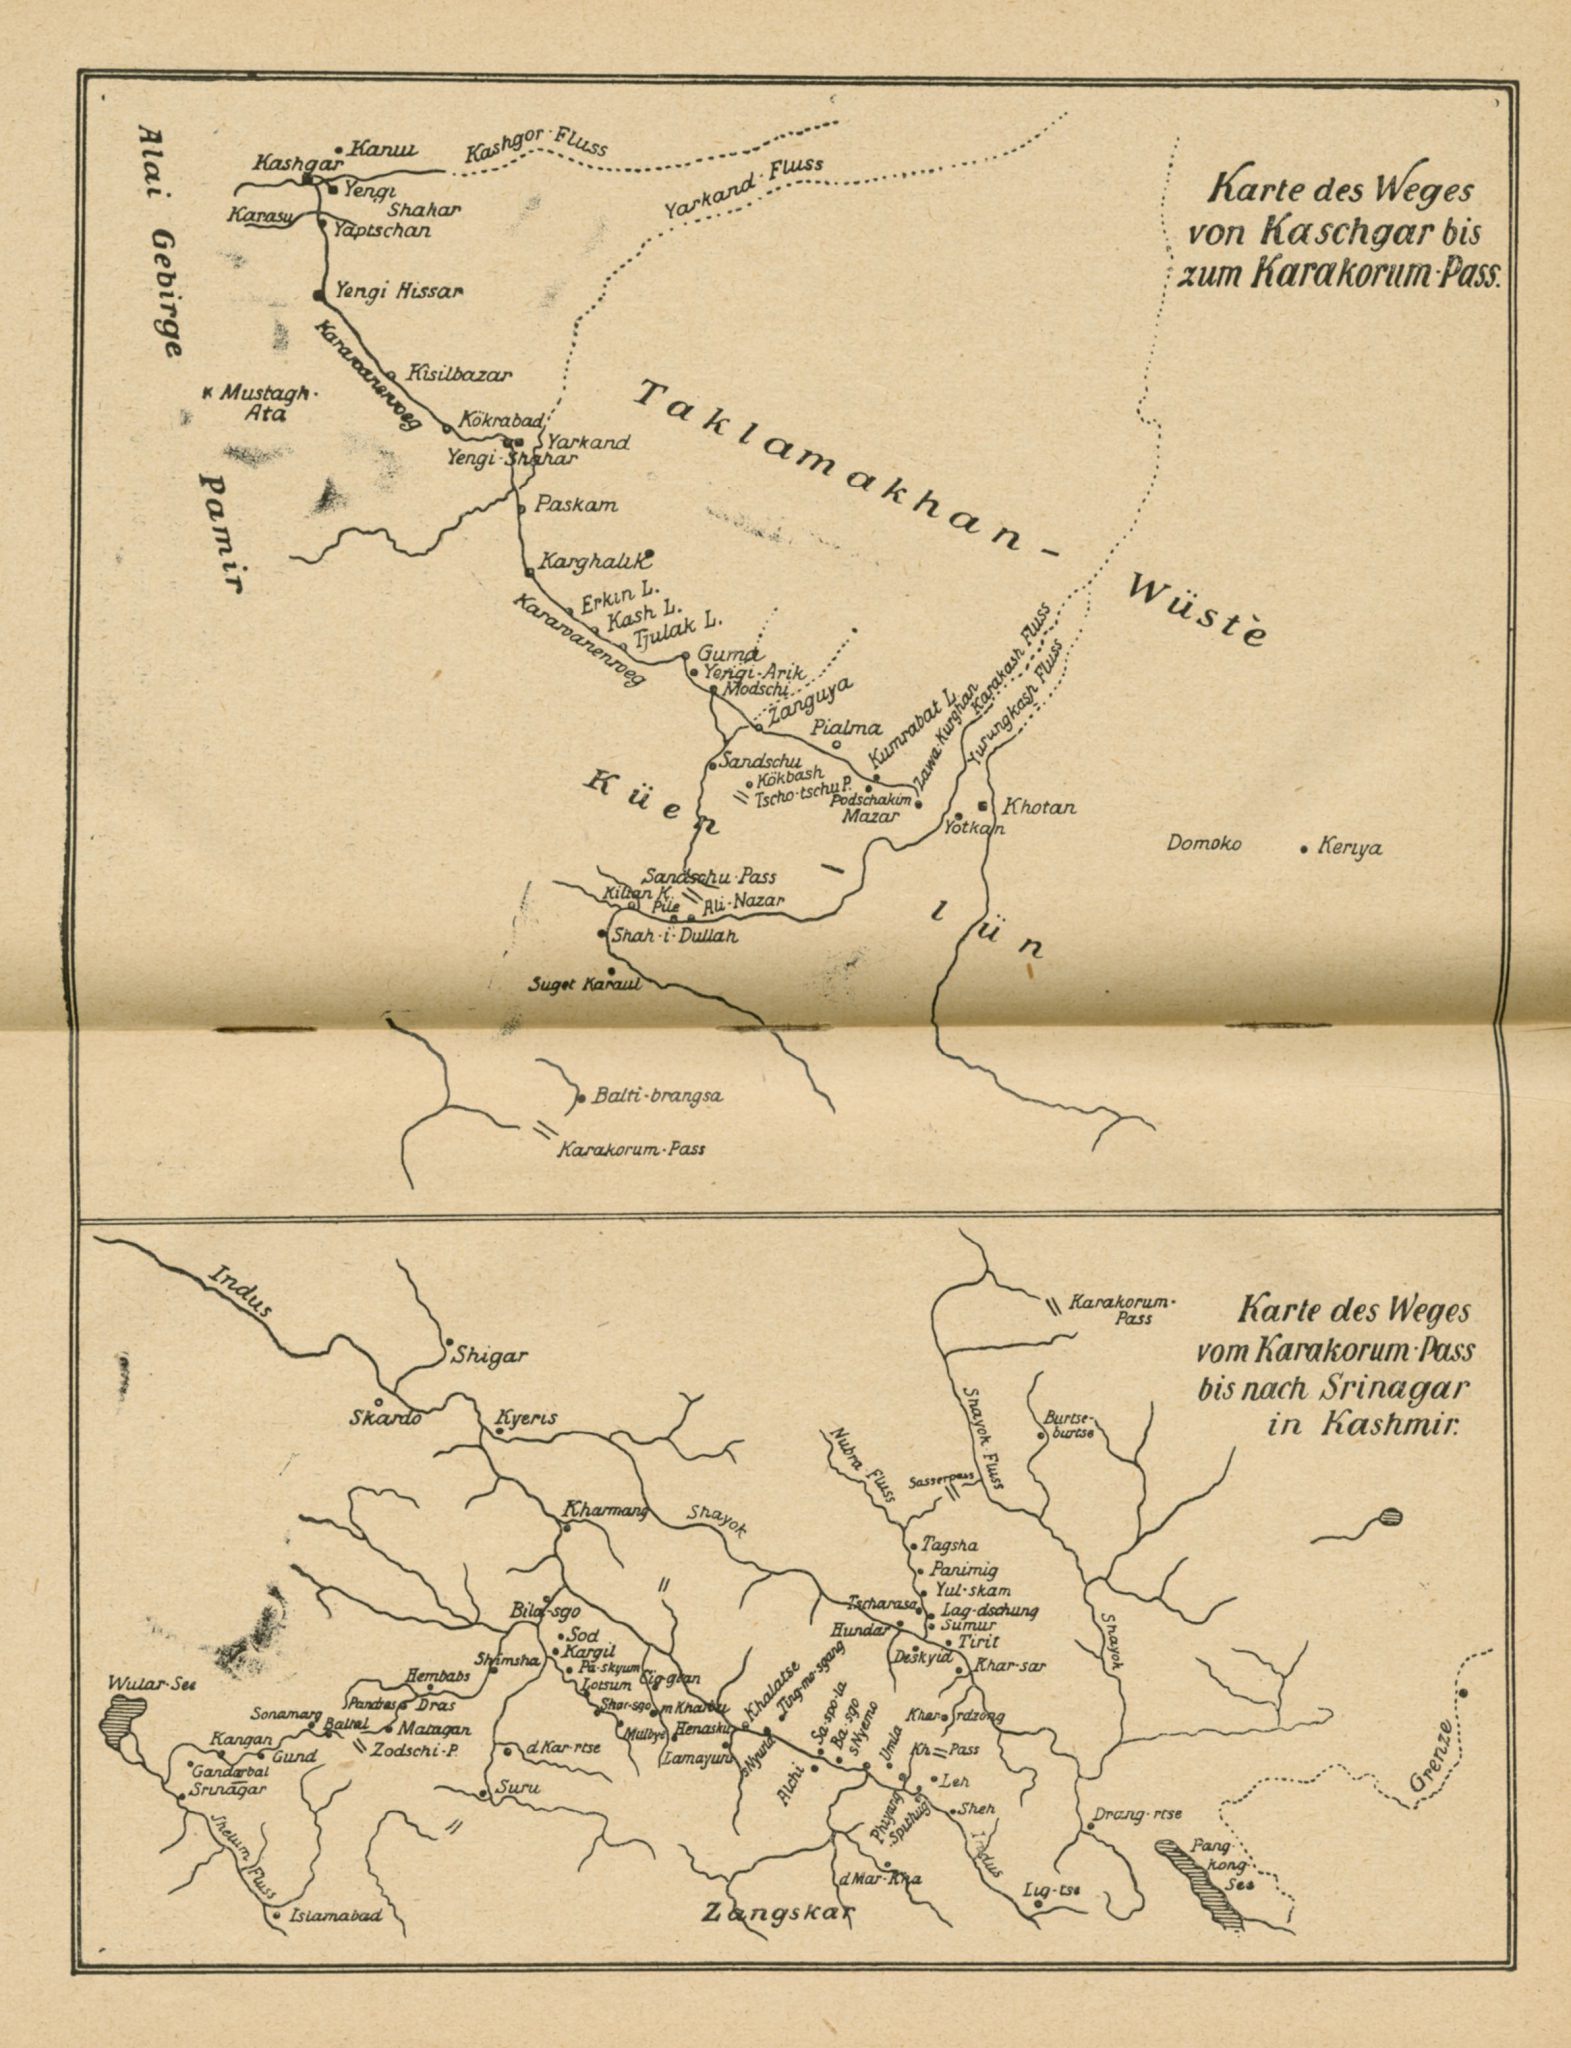 Map of the route from Kashgar to the Karakorum pass, and to Srinagar 1921